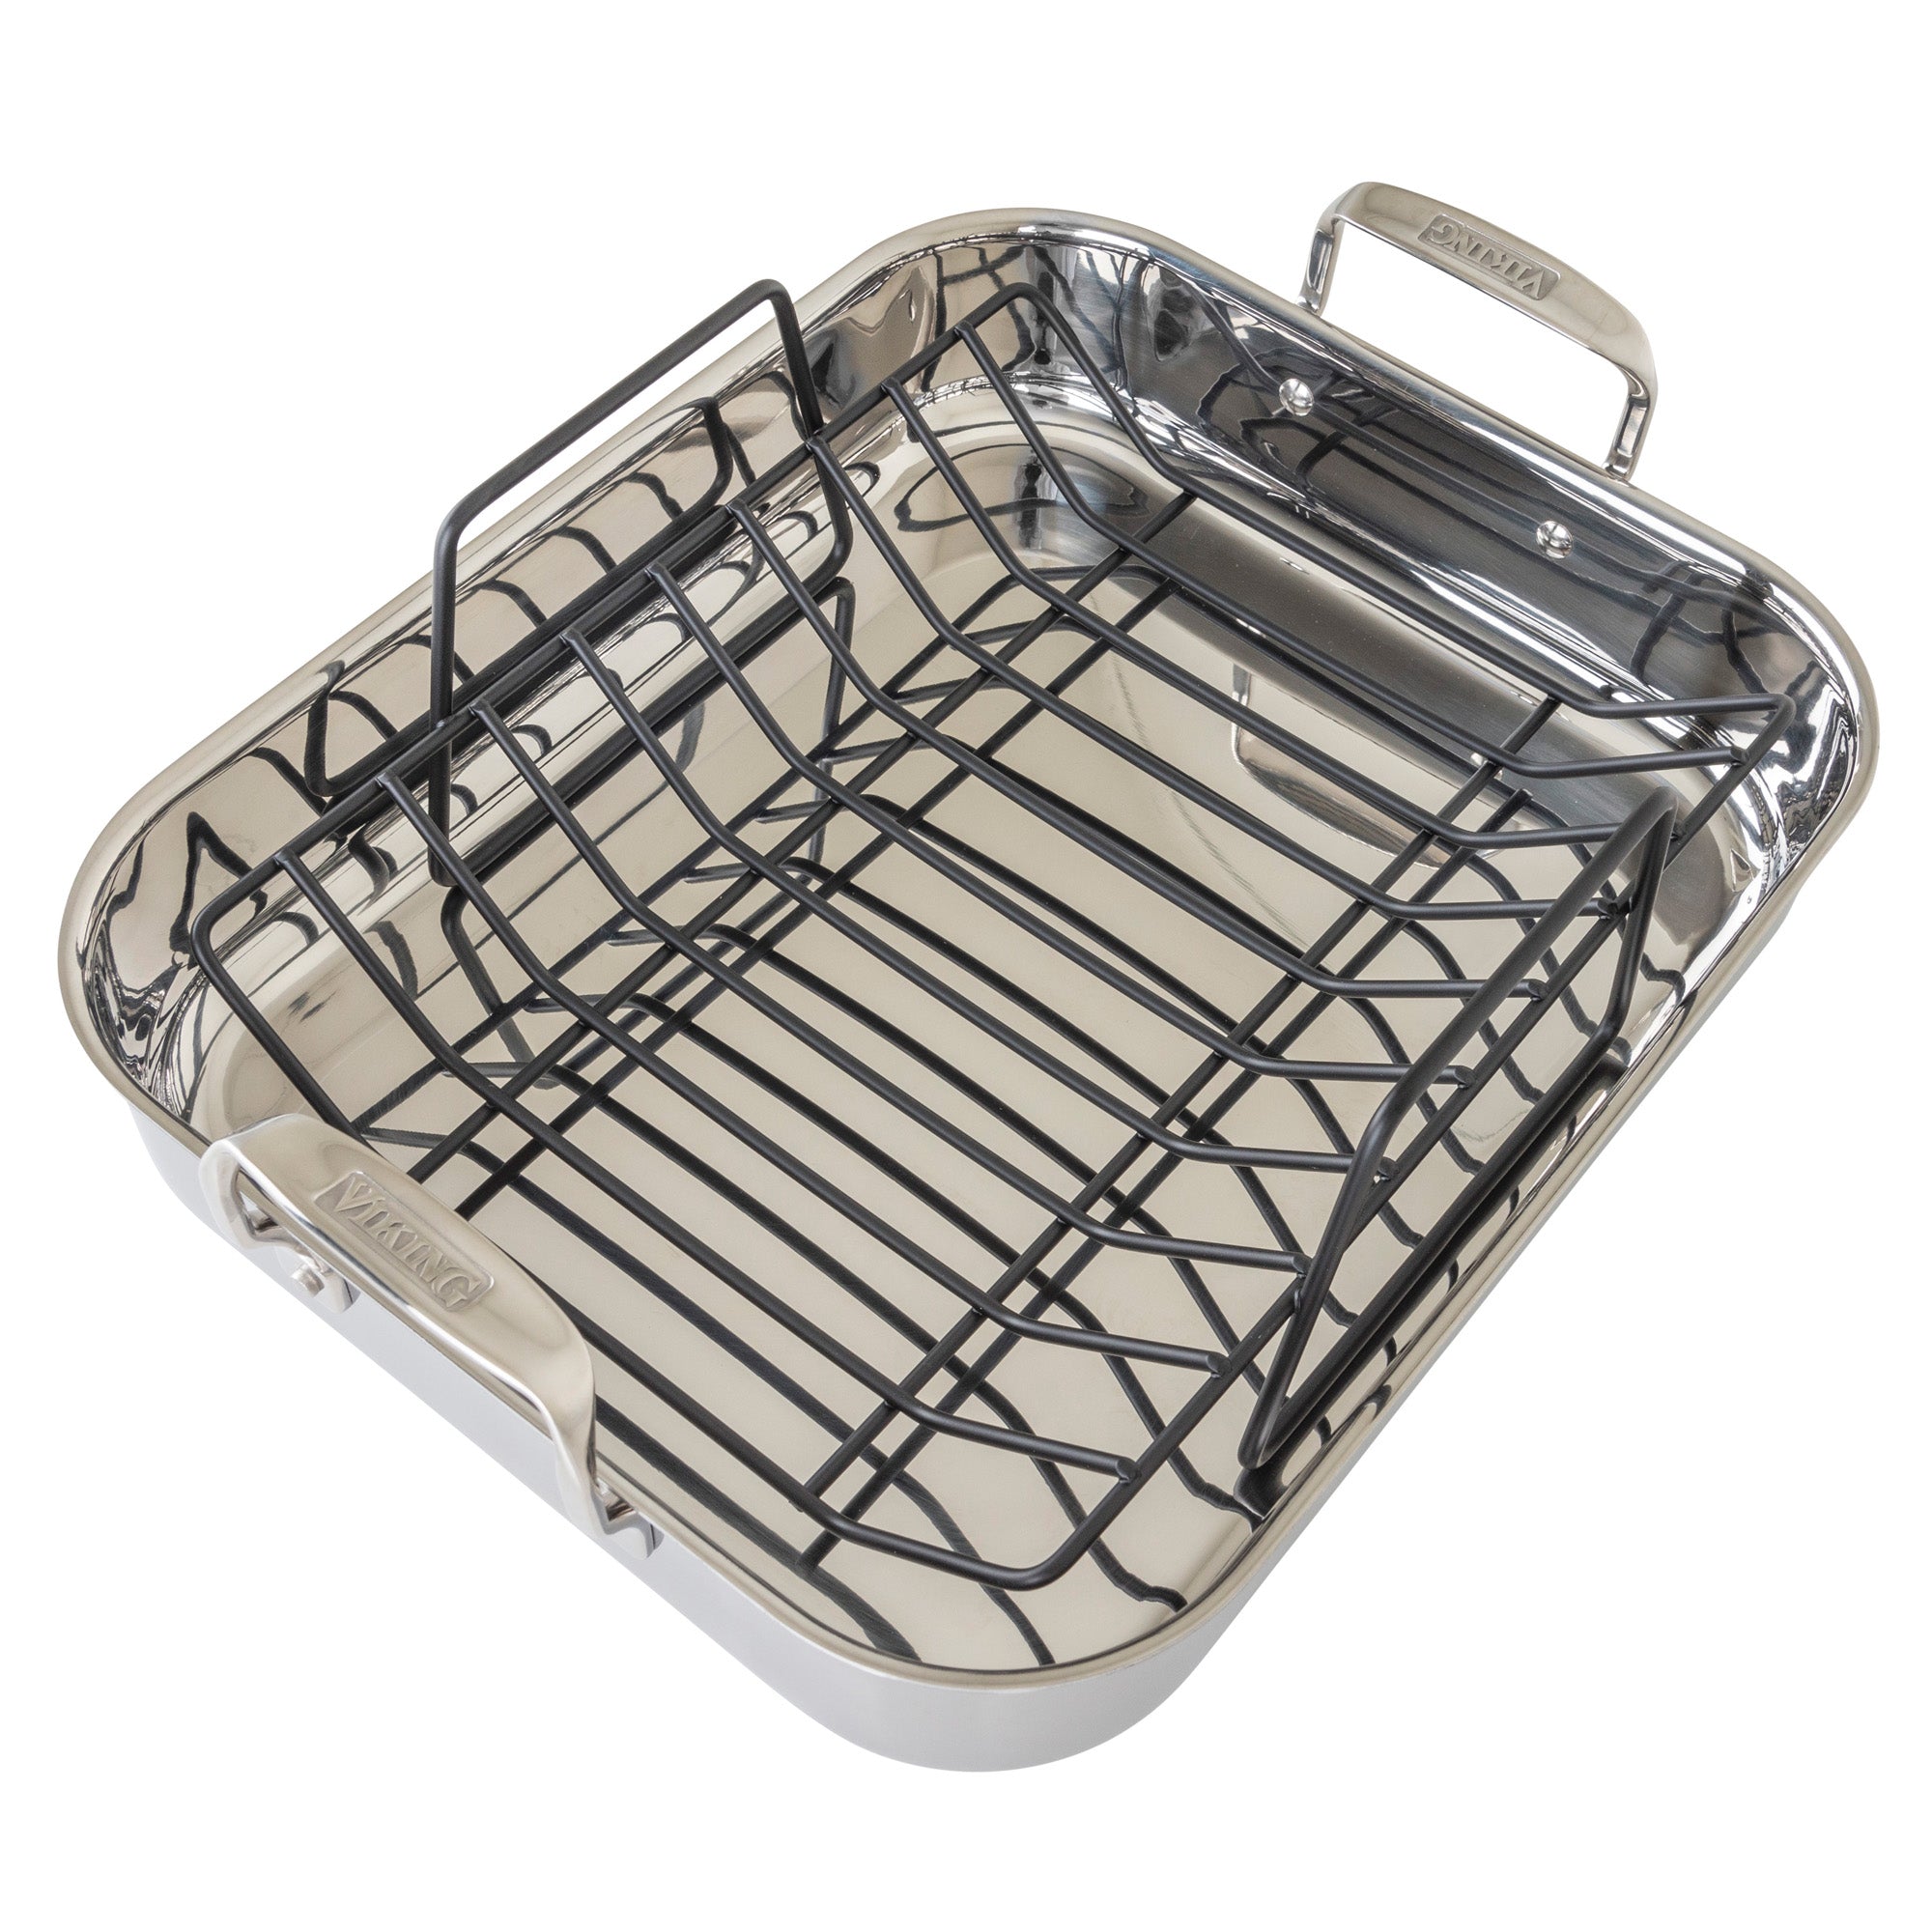 Viking 3-Ply 8.5-Quart 3-in-1 Oval Roaster with Rack – Viking Culinary  Products